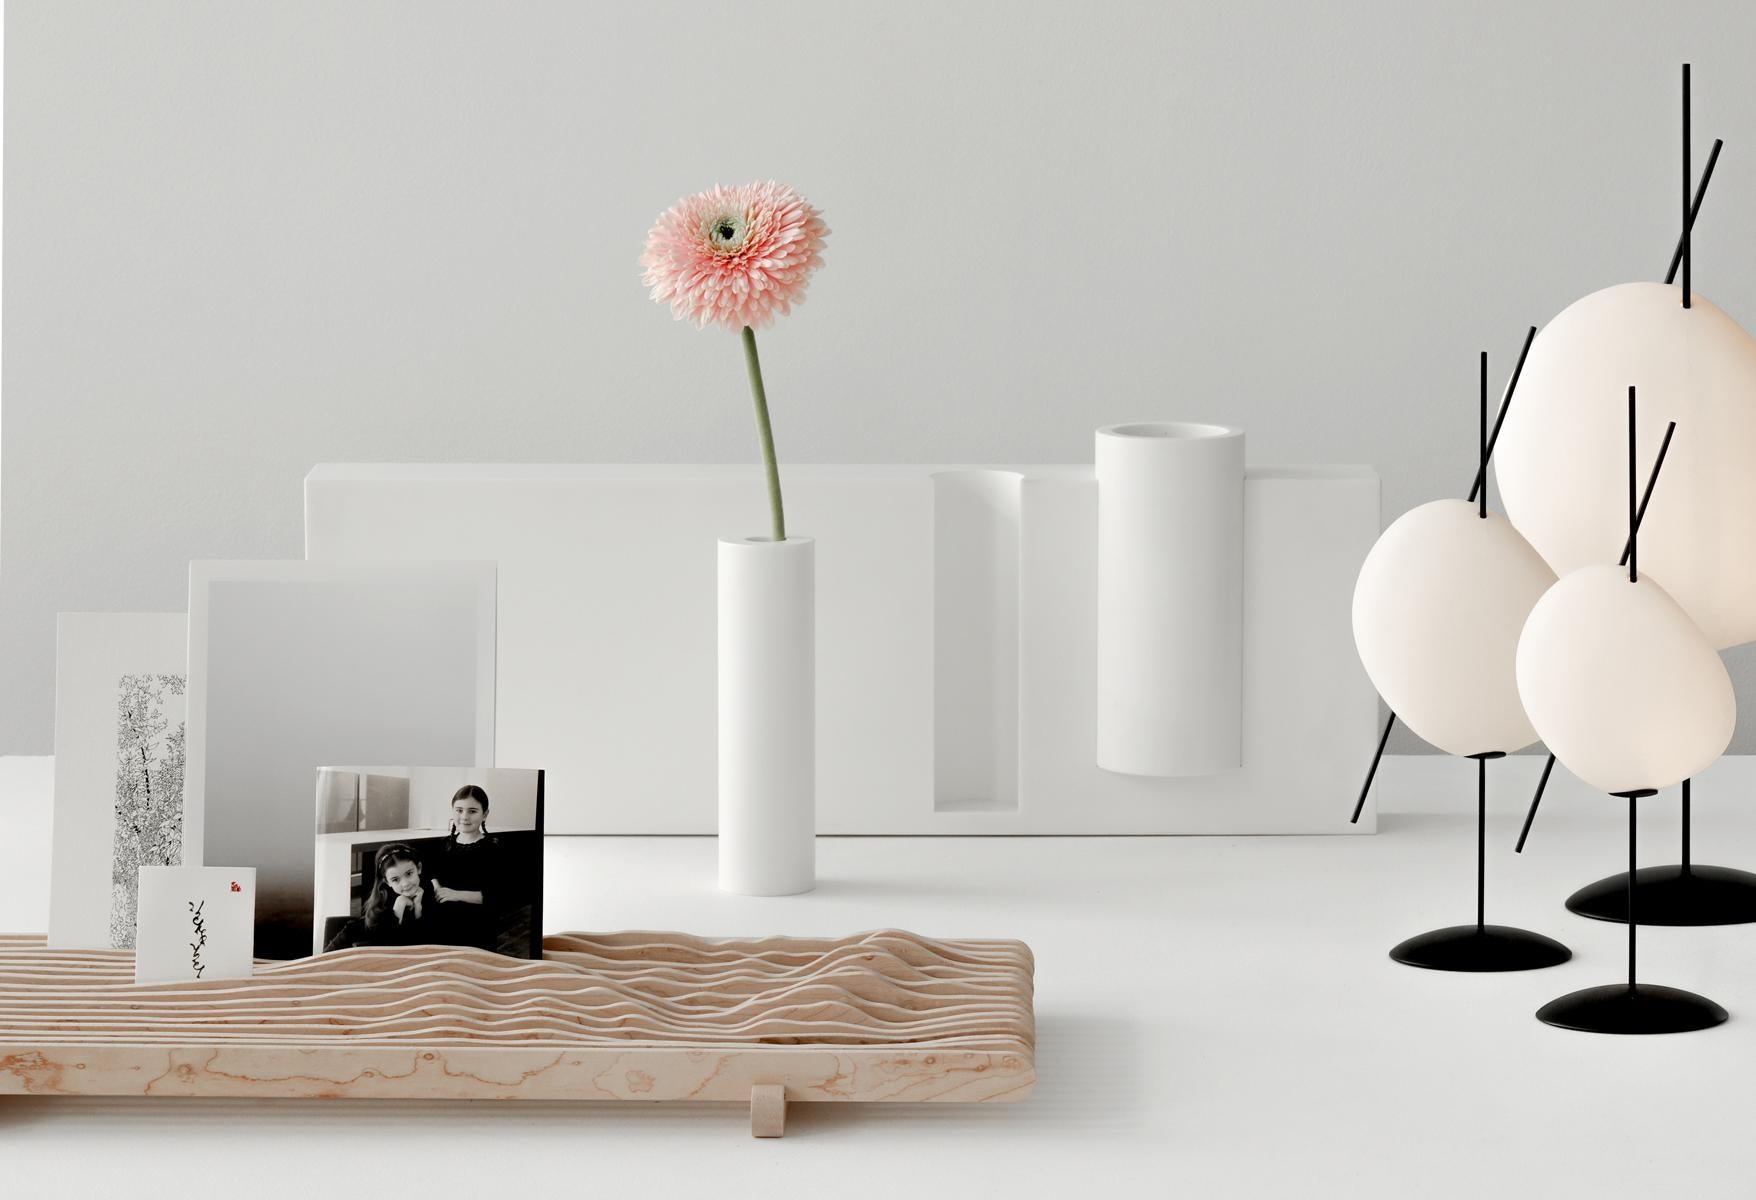 The Bolean is a vase in white Corian based on a constructive principle, material removal, mechanical micro-architecture.

Bolean is part of the À L’Origine collection created by YMER&MALTA Studio. A l’Origine has a dreamlike, sensitive dimension